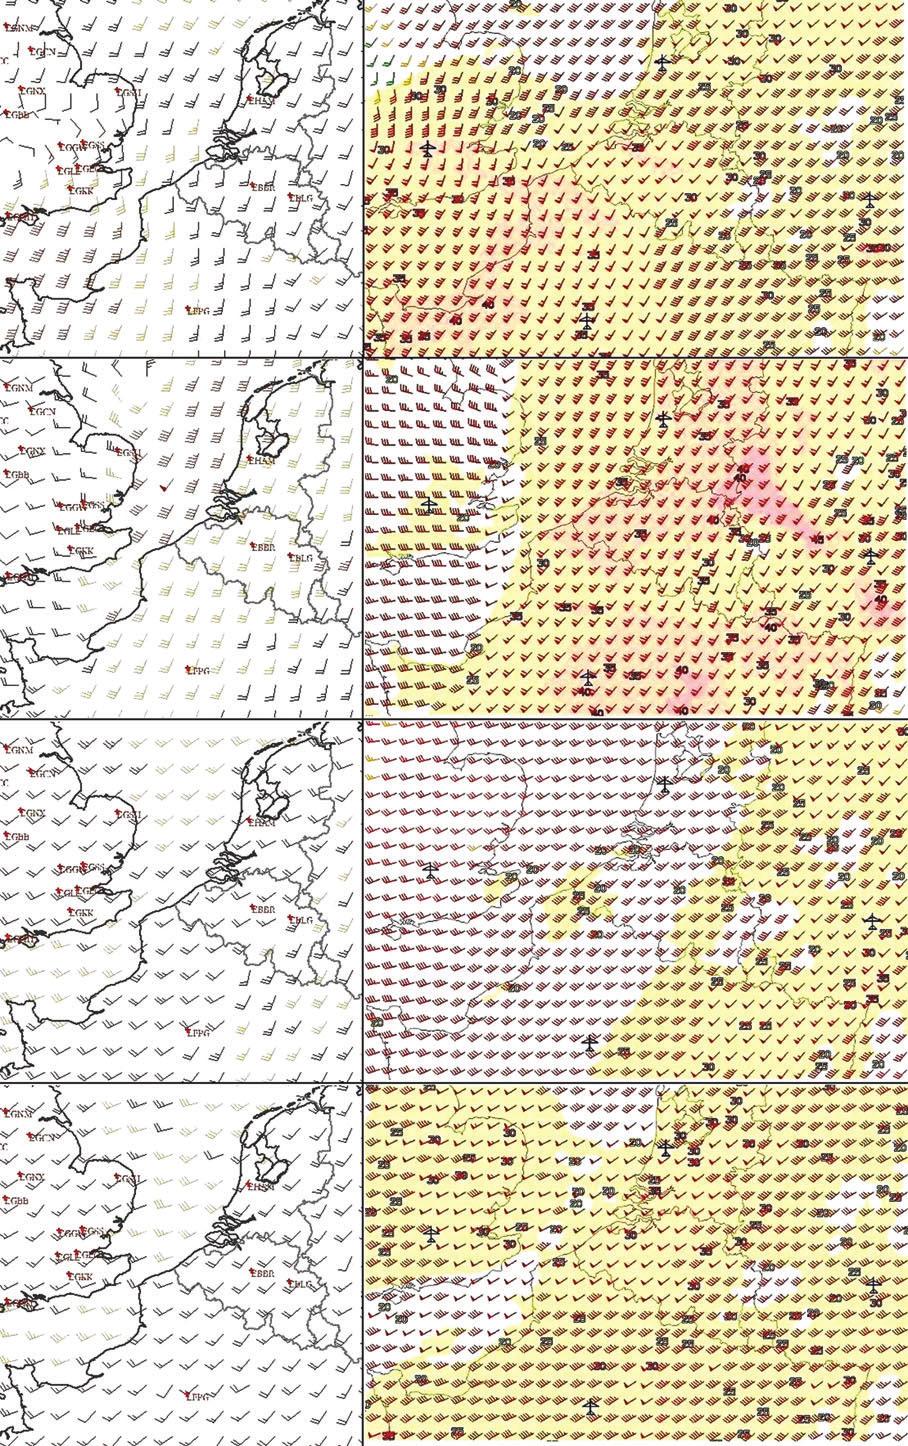 Near-surface winds and wind shear at four airports ate forecast snapshots of the WRF model at 0200 and 0400 UTC (not shown).